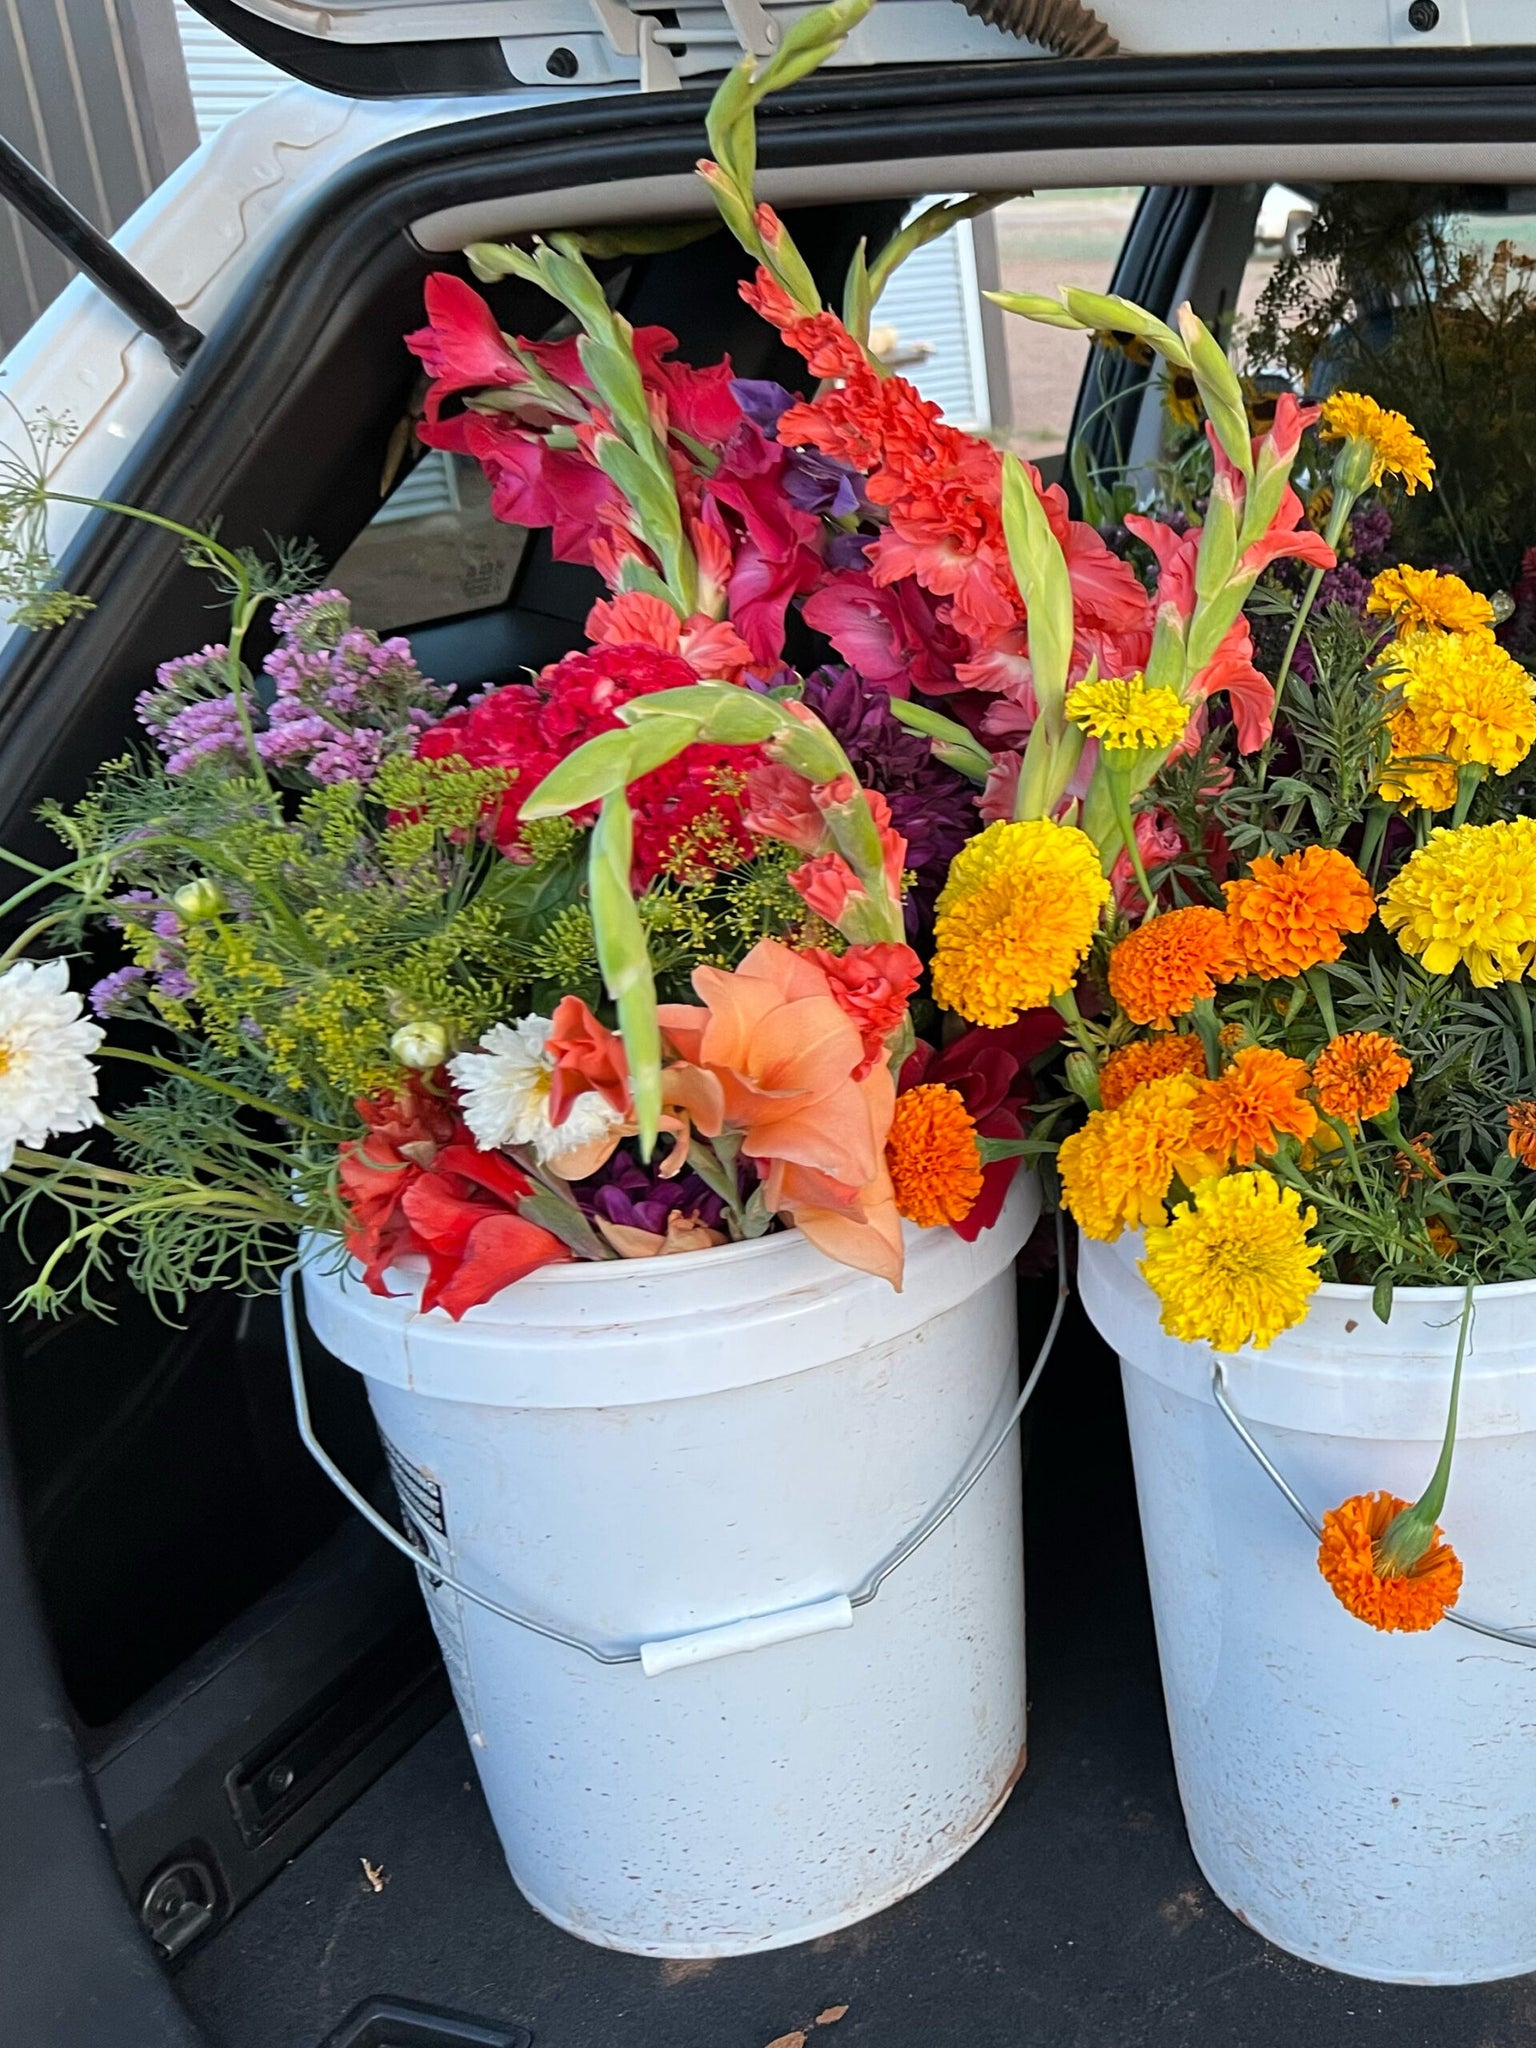 5 Gallon Bucket of Flowers - Delivery